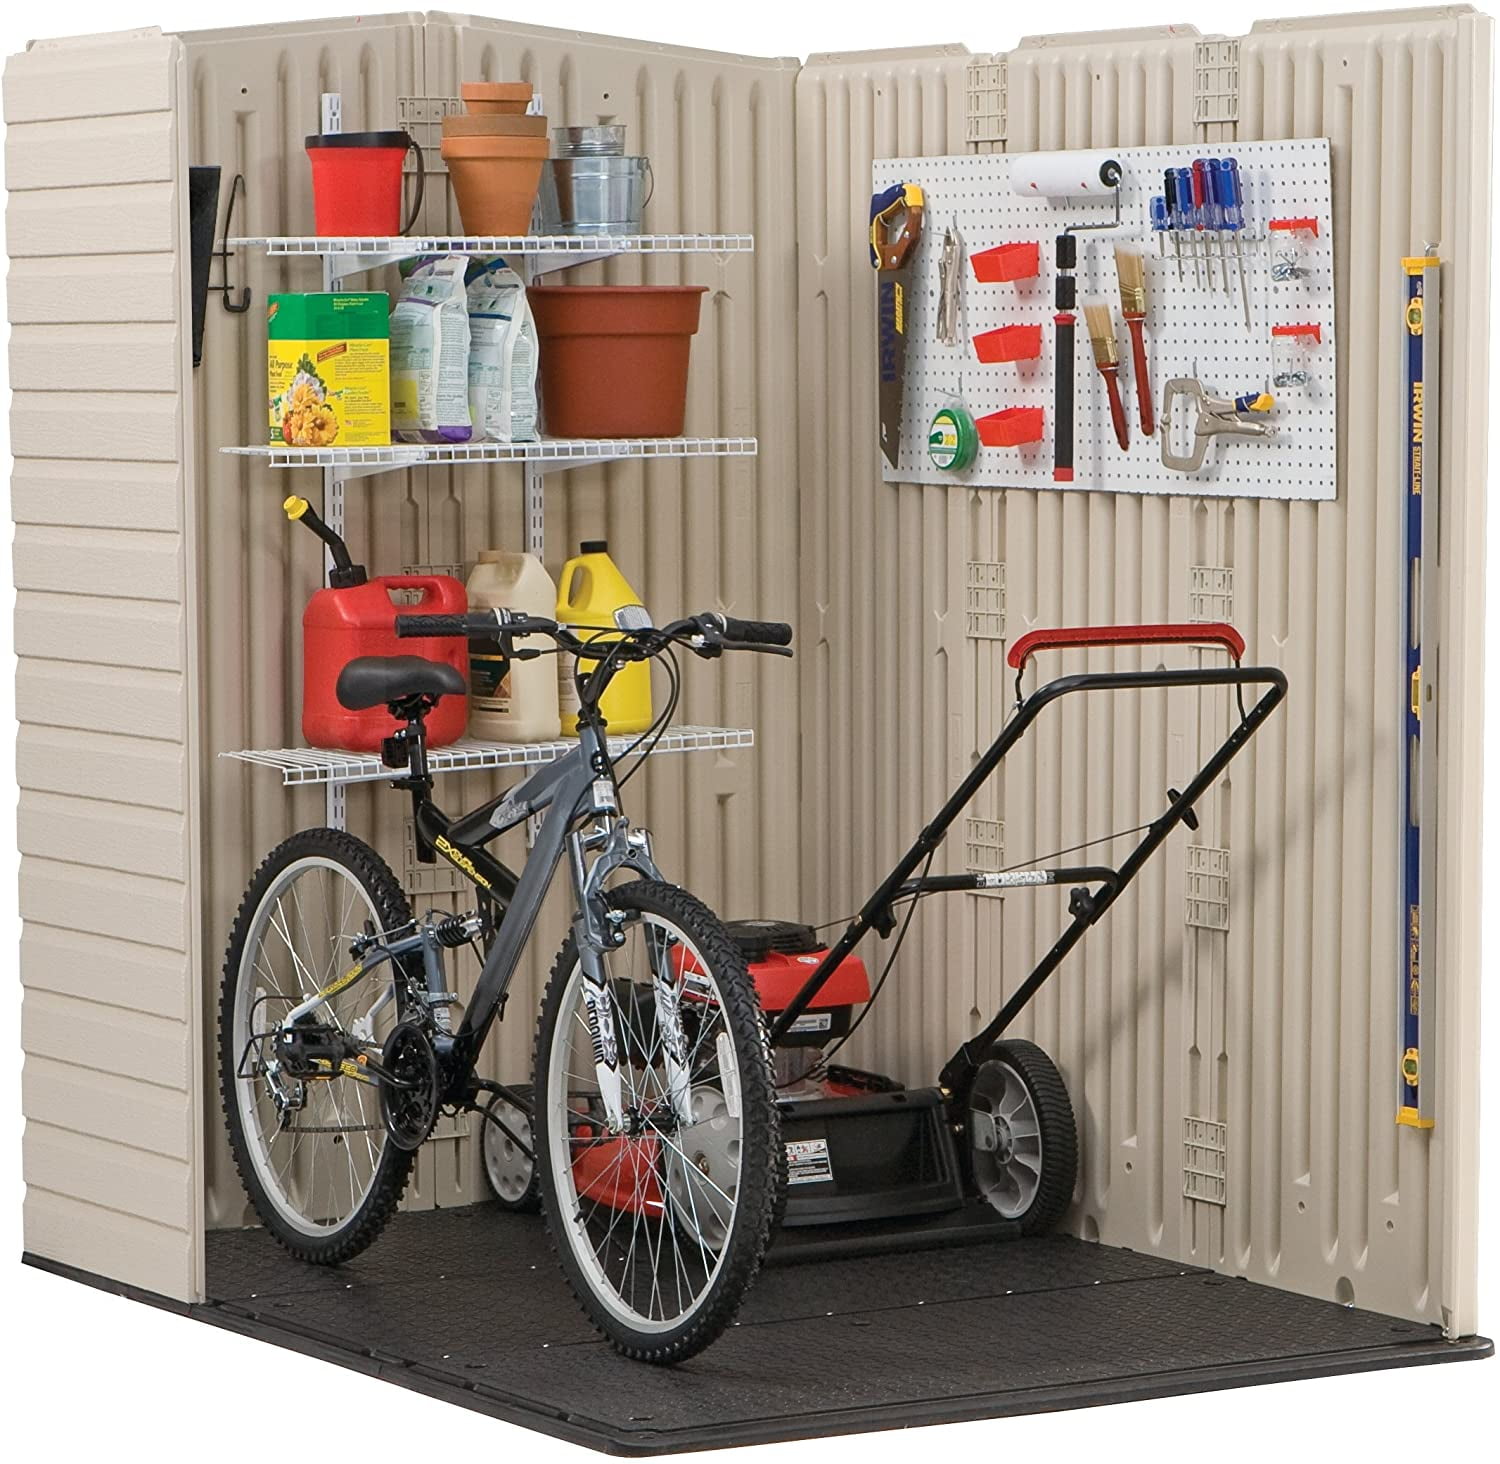 Rubbermaid Large 5x6 Ft Resin Weather Resistant Outdoor Storage Shed,  Sandstone, 1 Piece - Baker's